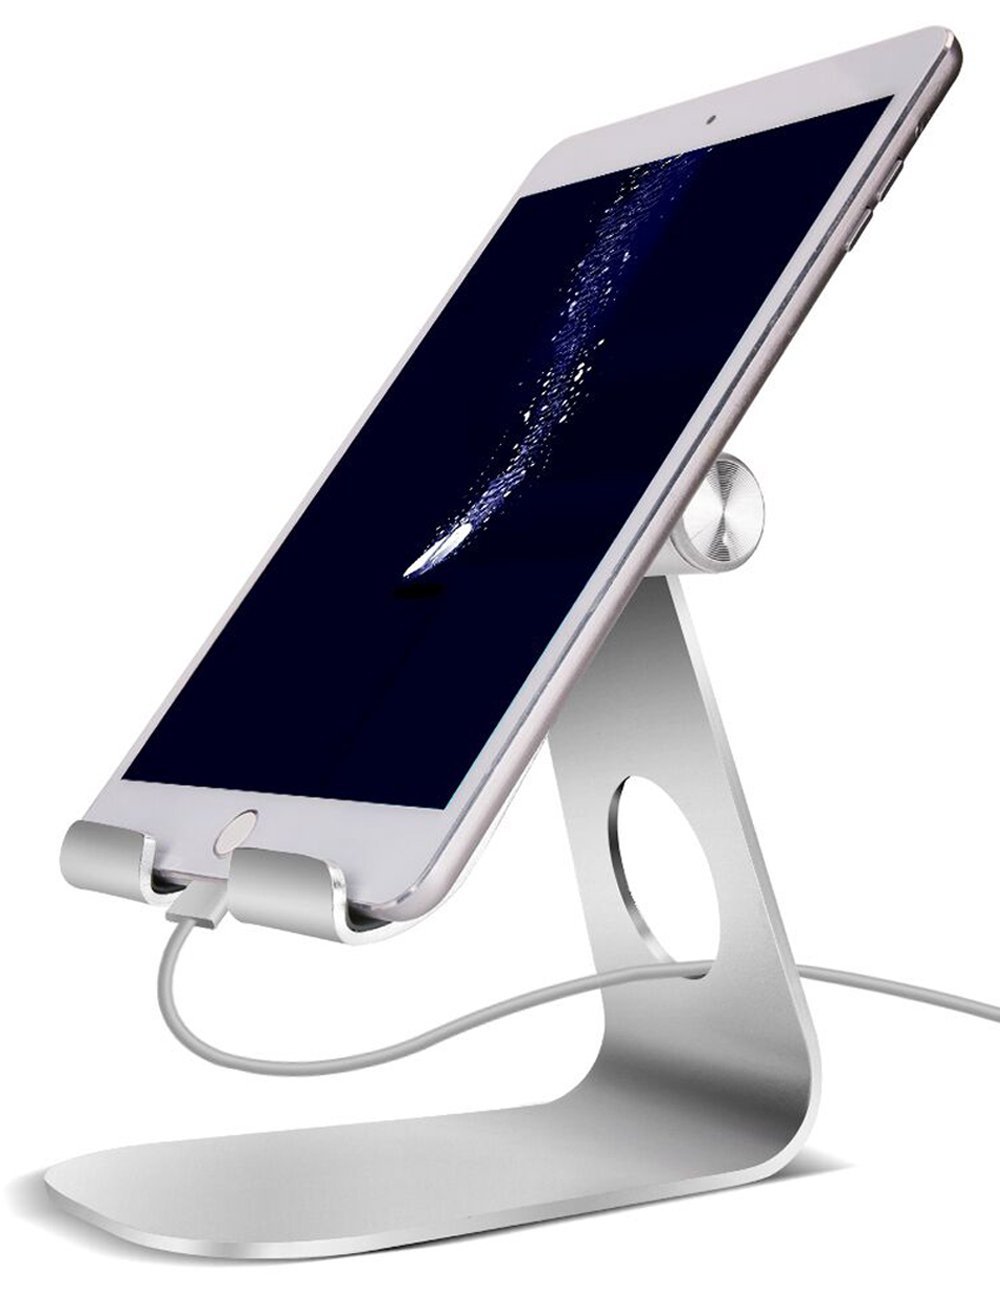 iPad Pro Tablet Holder Stand, Stouch 360° Rotatable Aluminum Alloy Desktop Holder Tablet Stand for Samsung Galaxy Tab Pro S iPad Pro 9.7" 12.9'' iPad Air Surface Pro 4 and other Tablet